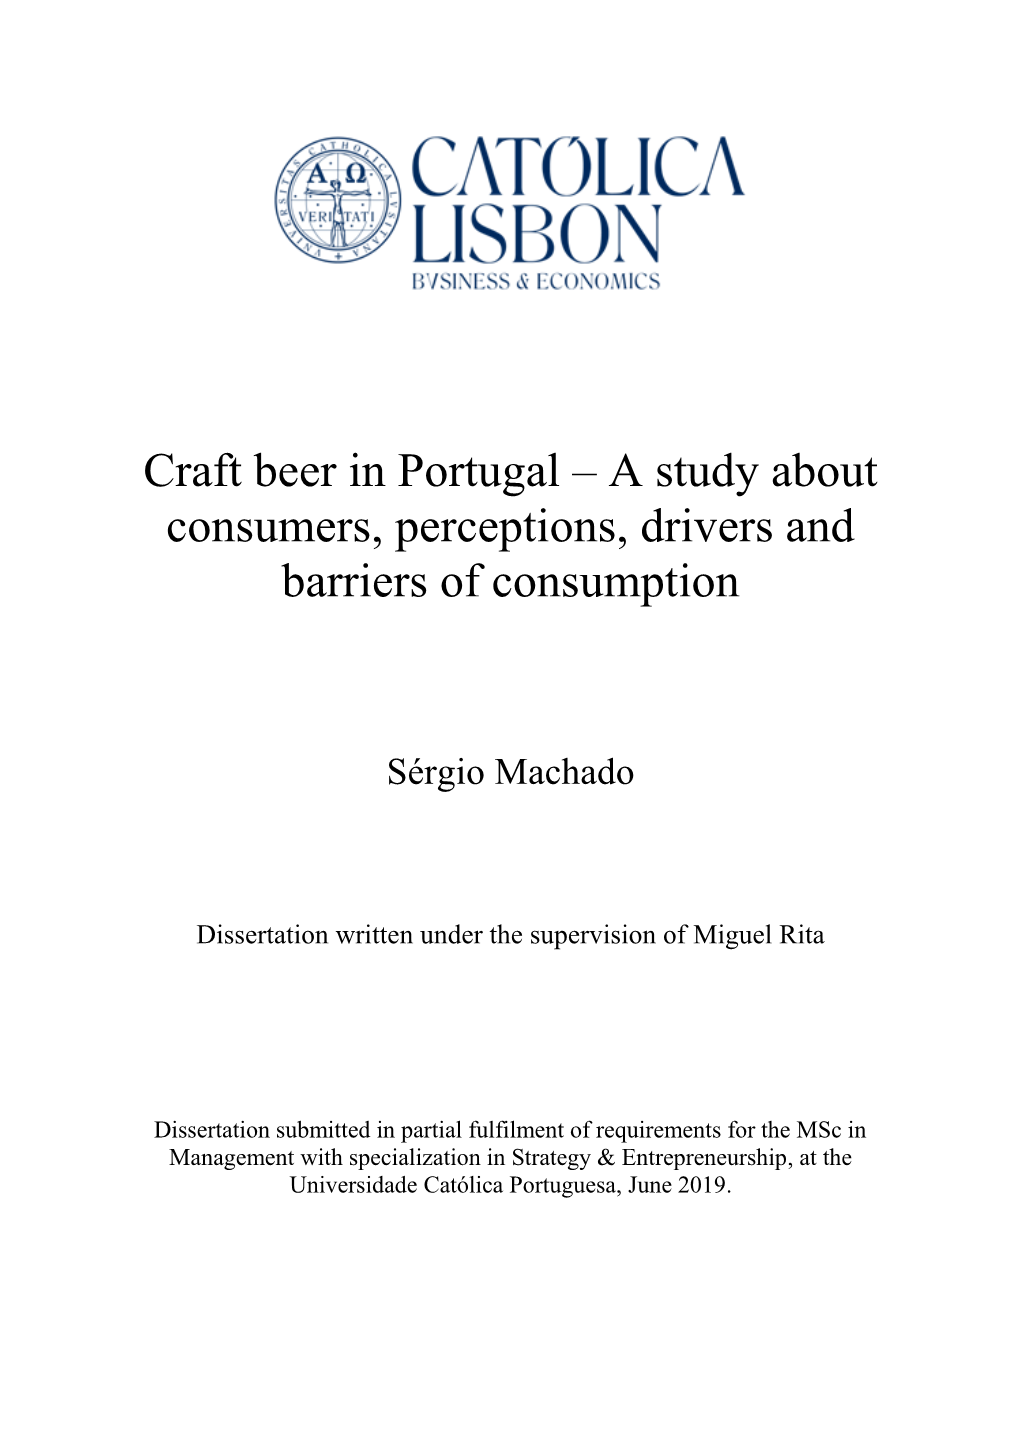 Craft Beer in Portugal – a Study About Consumers, Perceptions, Drivers and Barriers of Consumption